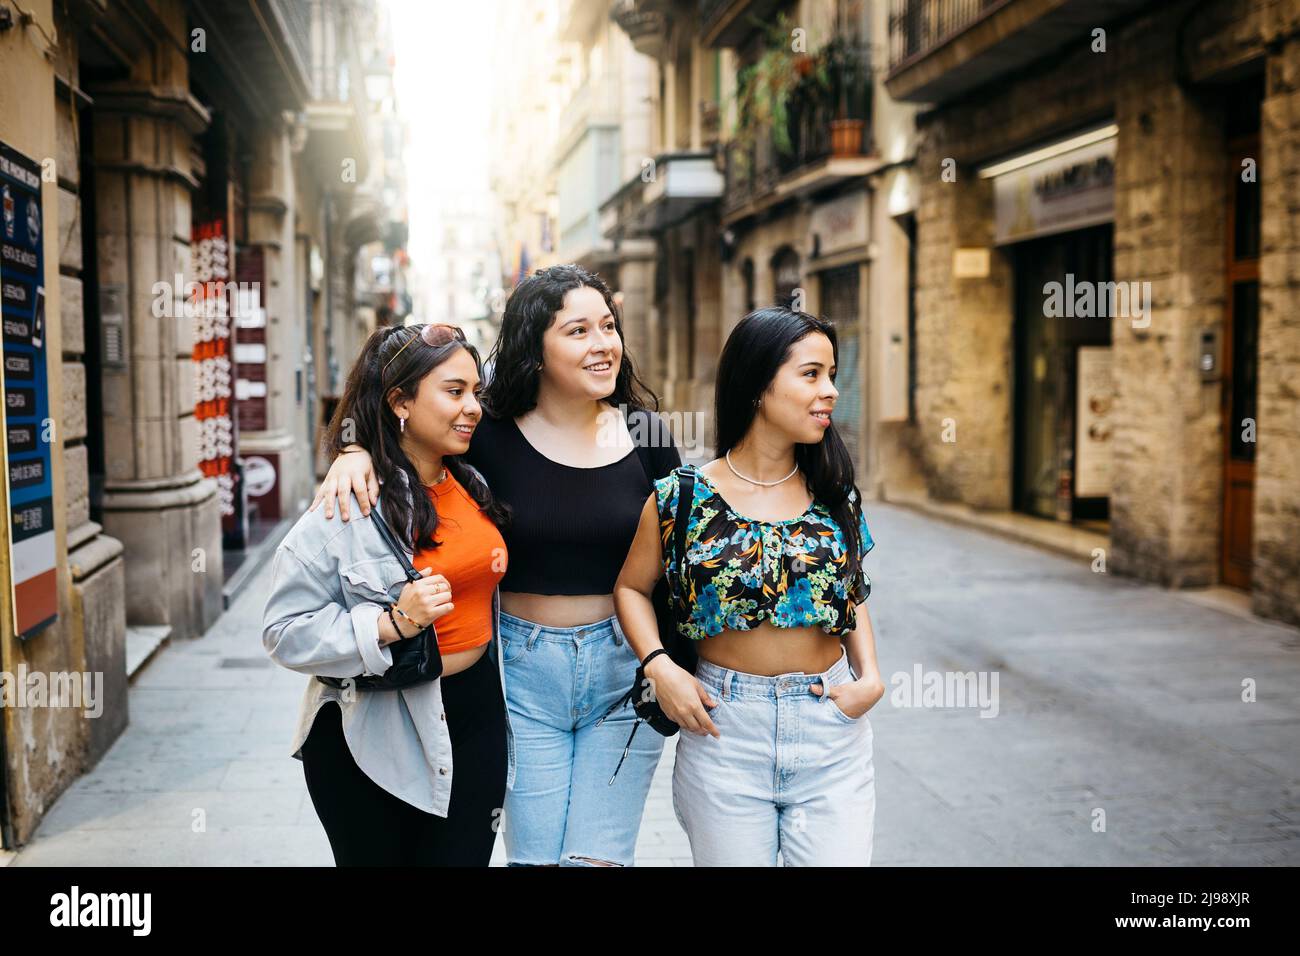 Three young women walking and hanging out on a comercial street of a big city Stock Photo